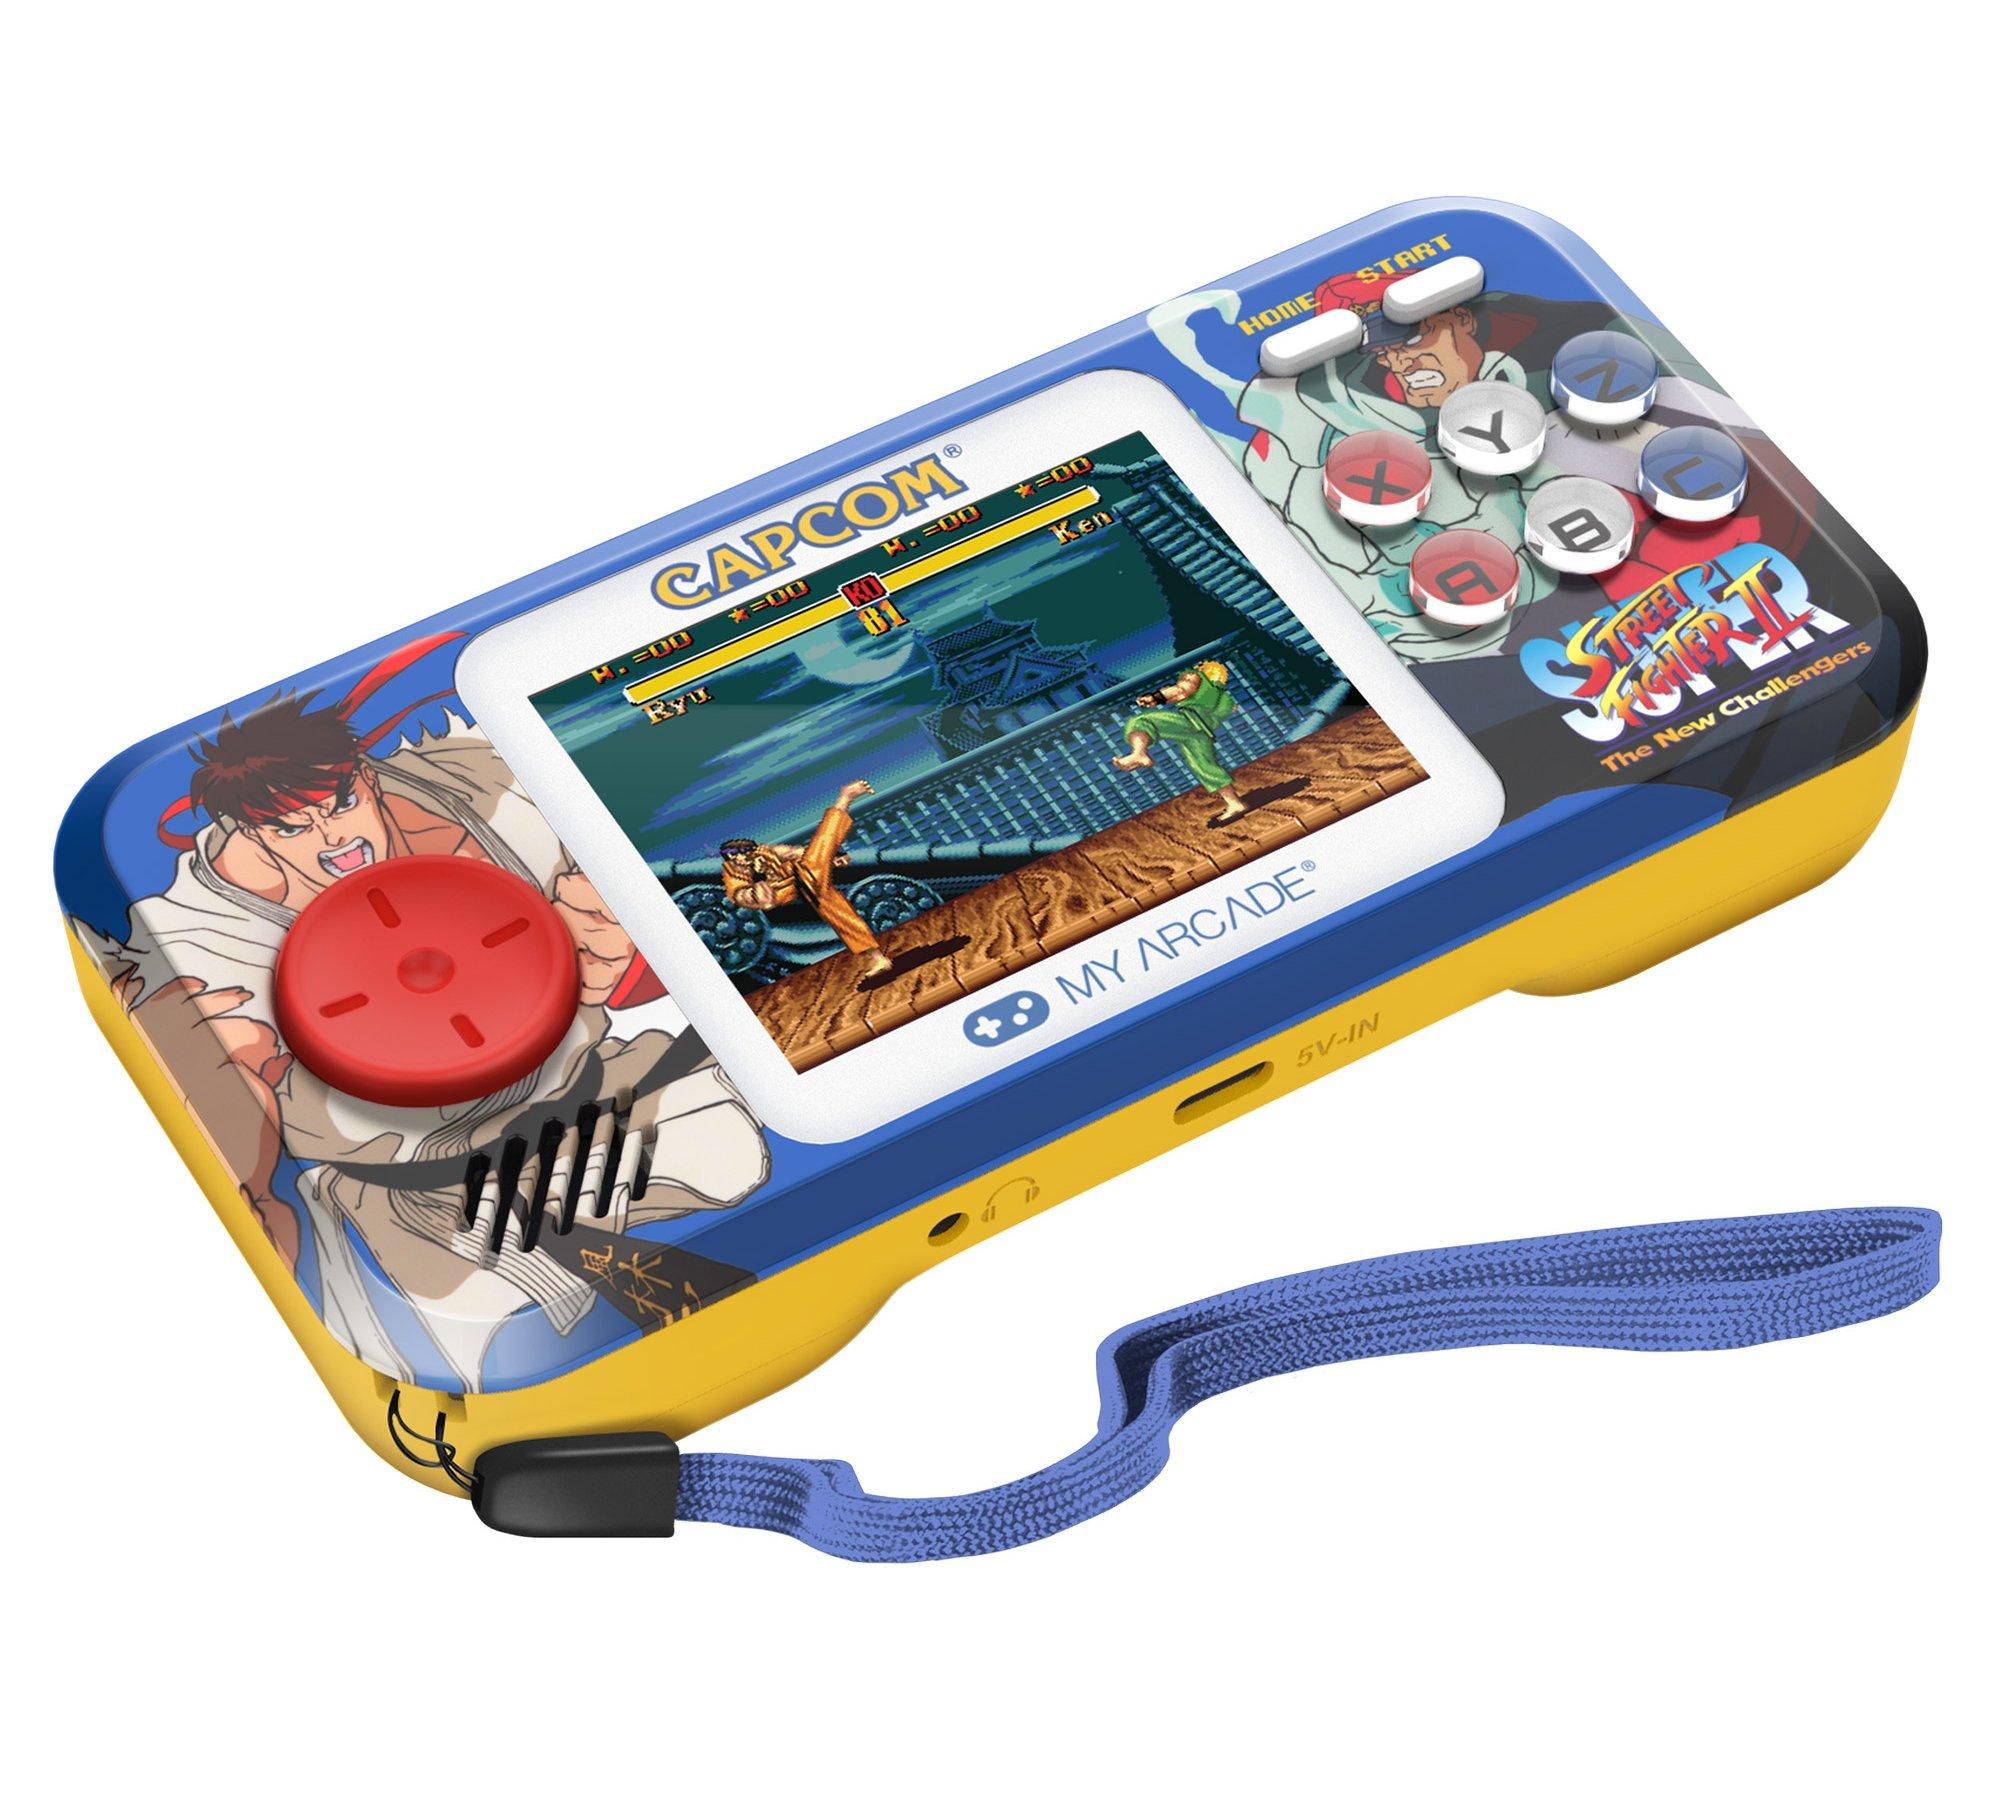 My Arcade SUPER STREET FIGHTER II Pocket Player PRO Handheld Portable Video Game System